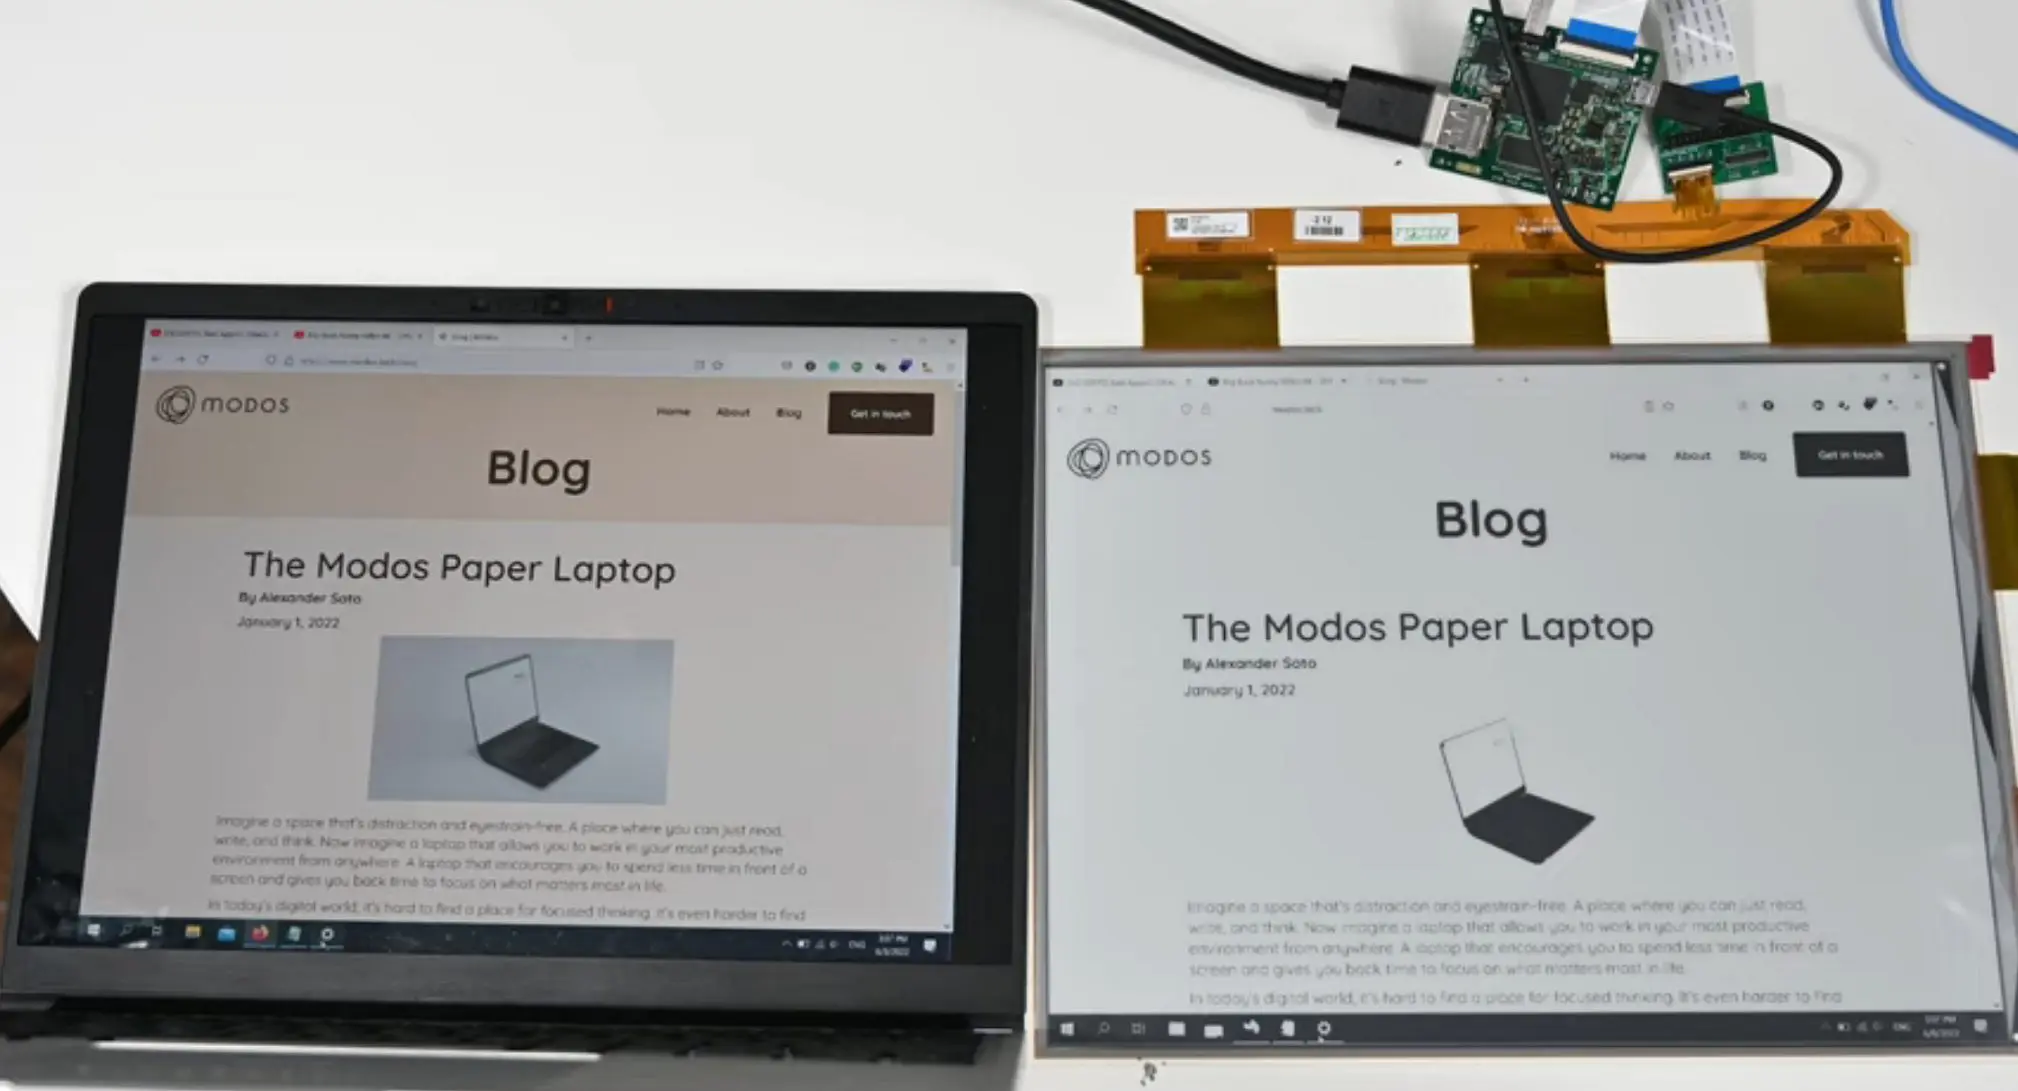 Modos Paper Monitor: Here is all that is known of the 13.3-inch E Ink monitor so far